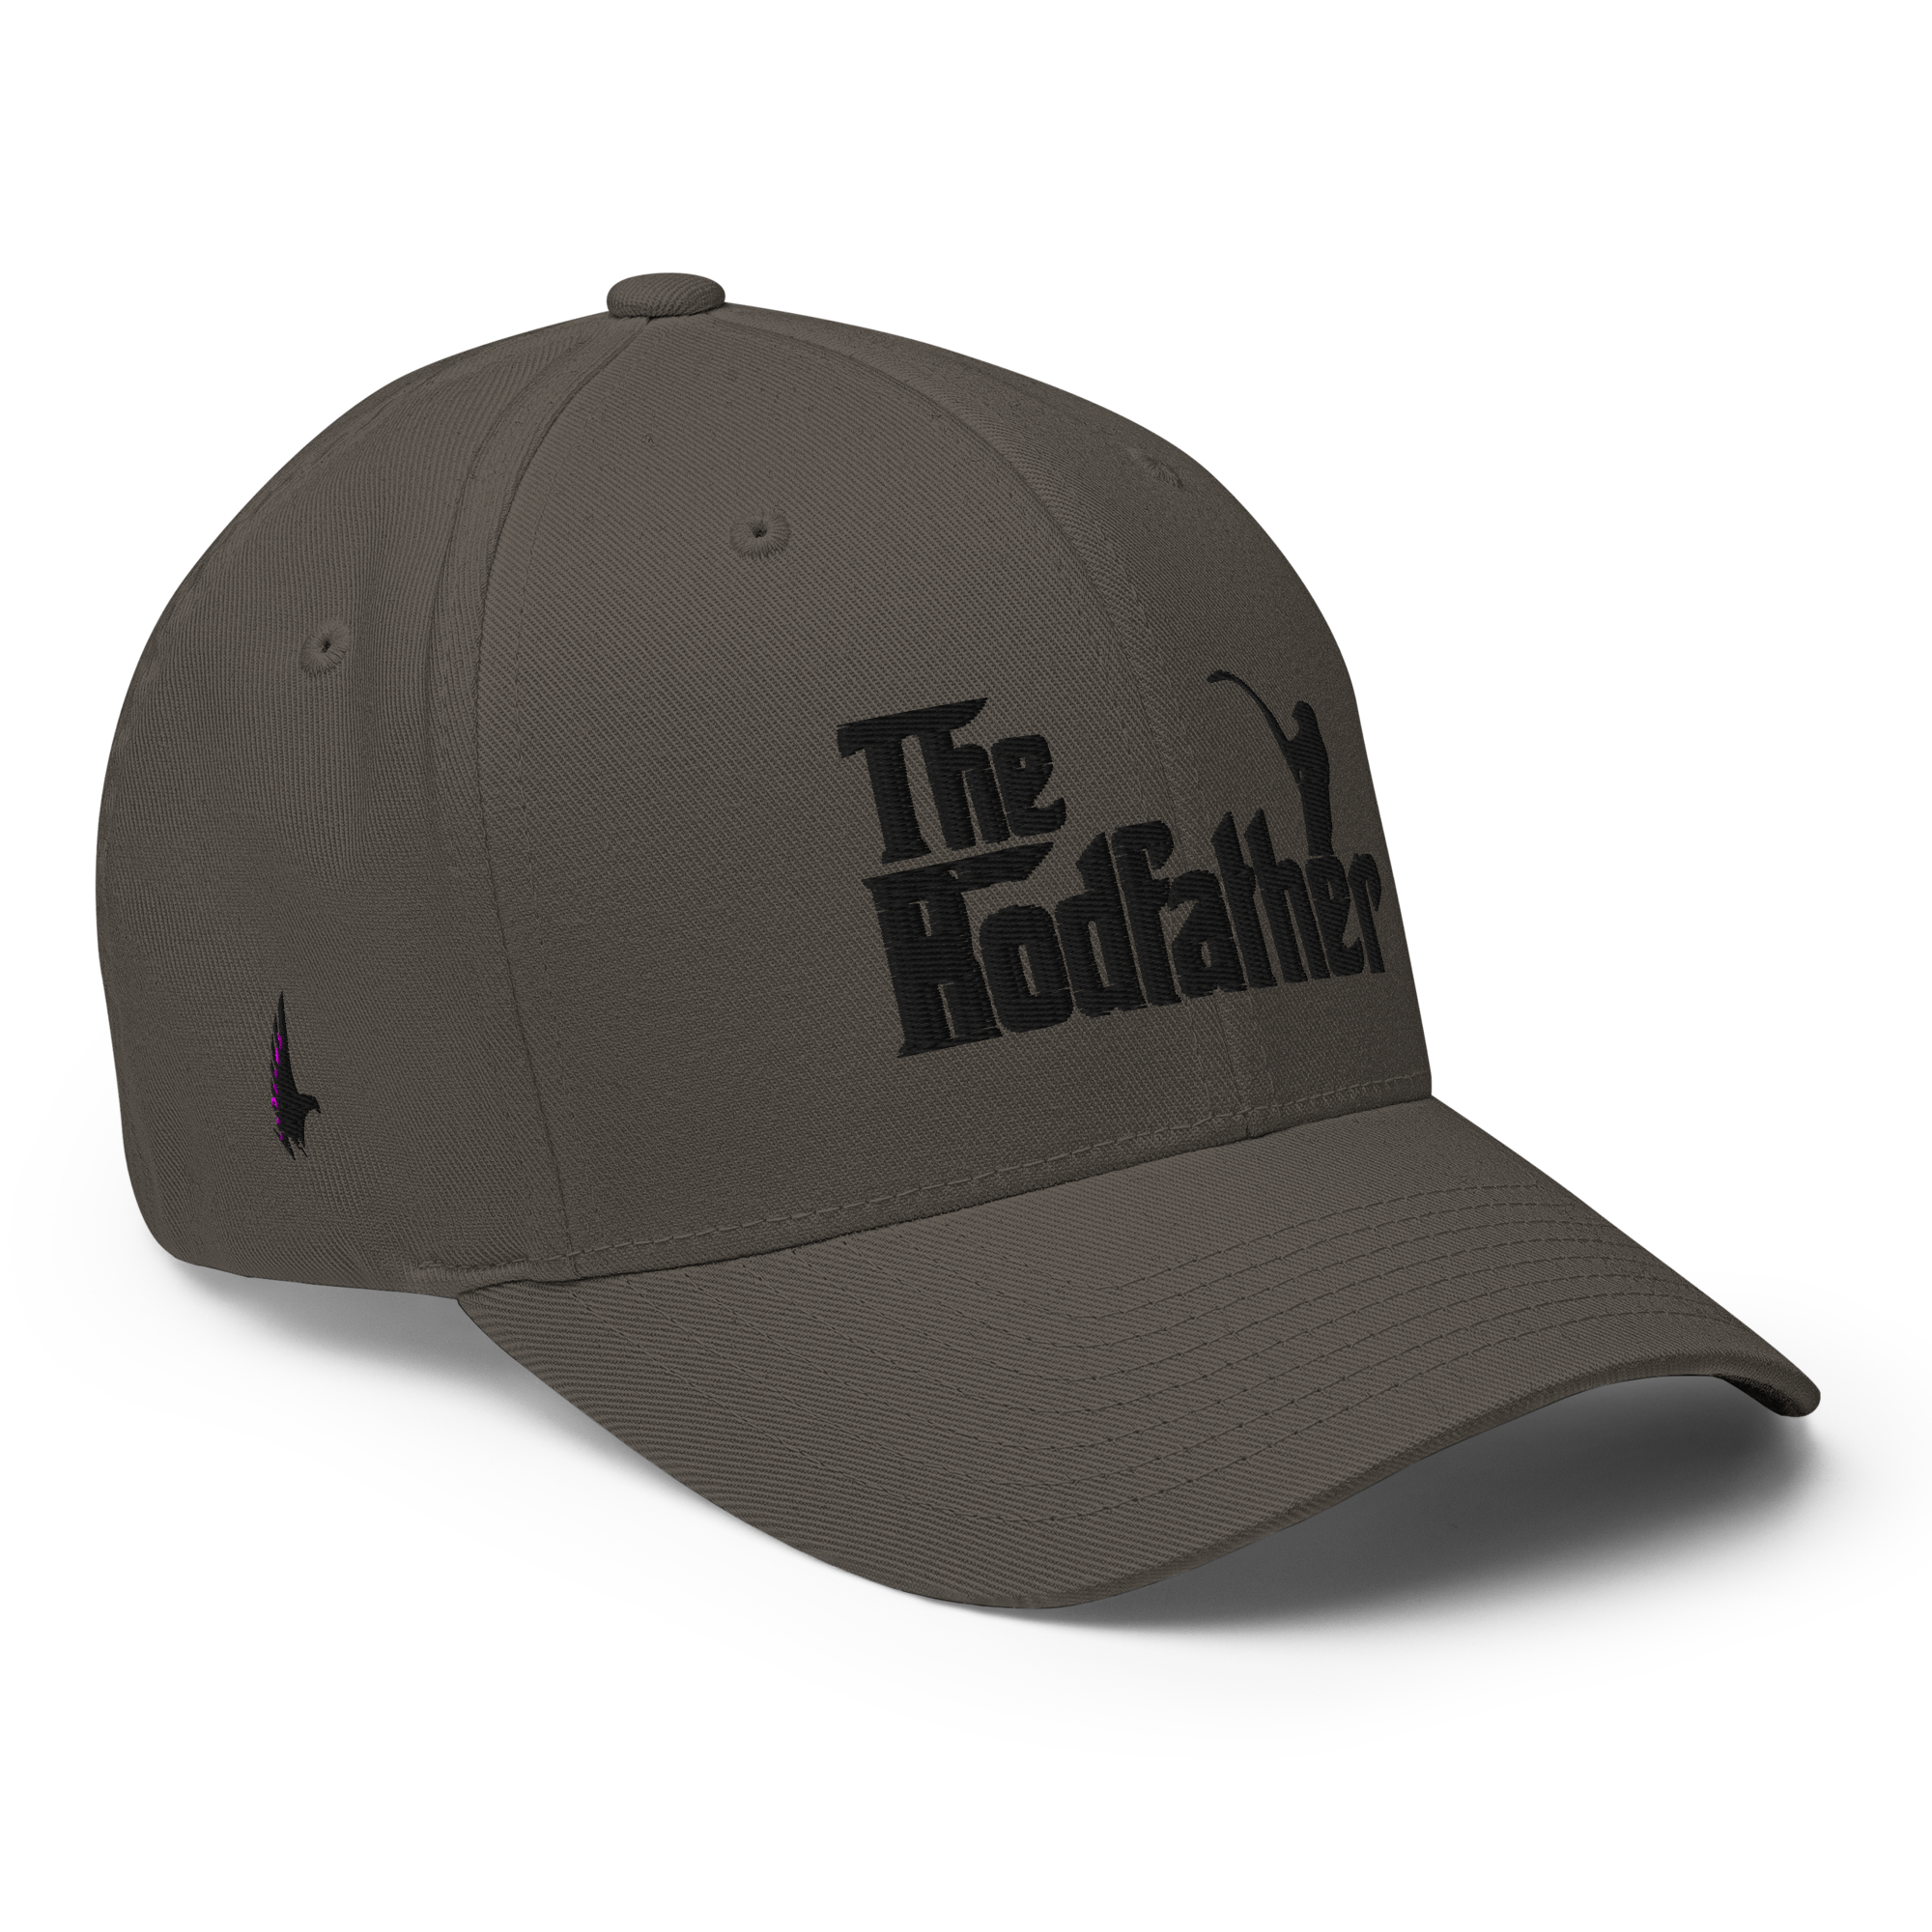 Rodfather Fitted Hat Charcoal Grey Black - Loyalty Vibes